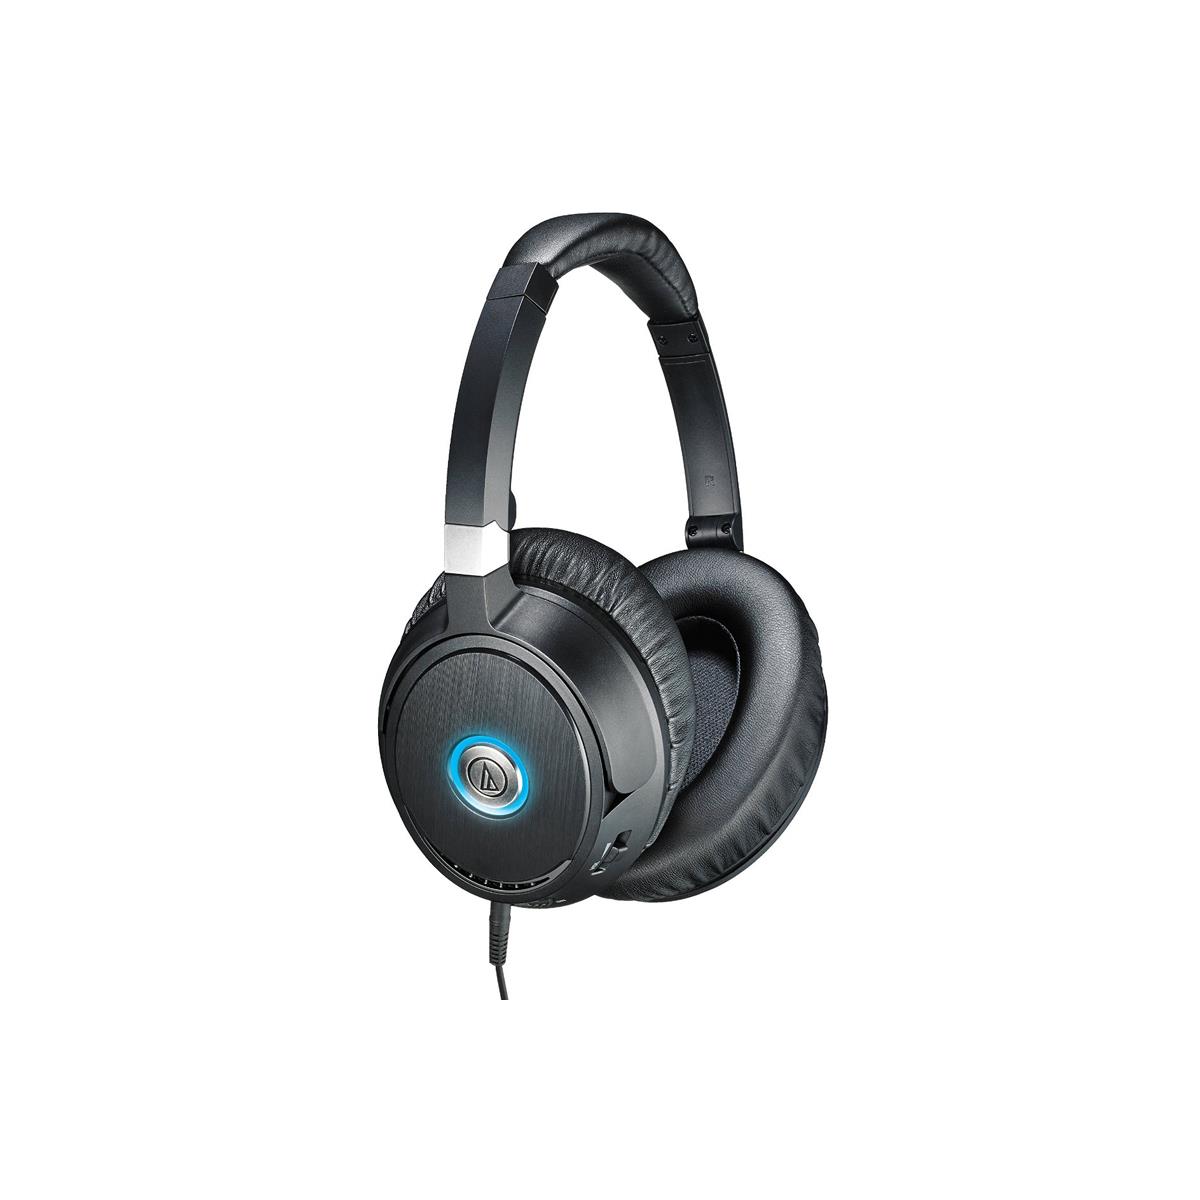 Image of Audio-Technica ATH-ANC70 QuietPoint Over-Ear Headphones with Built-in Mic